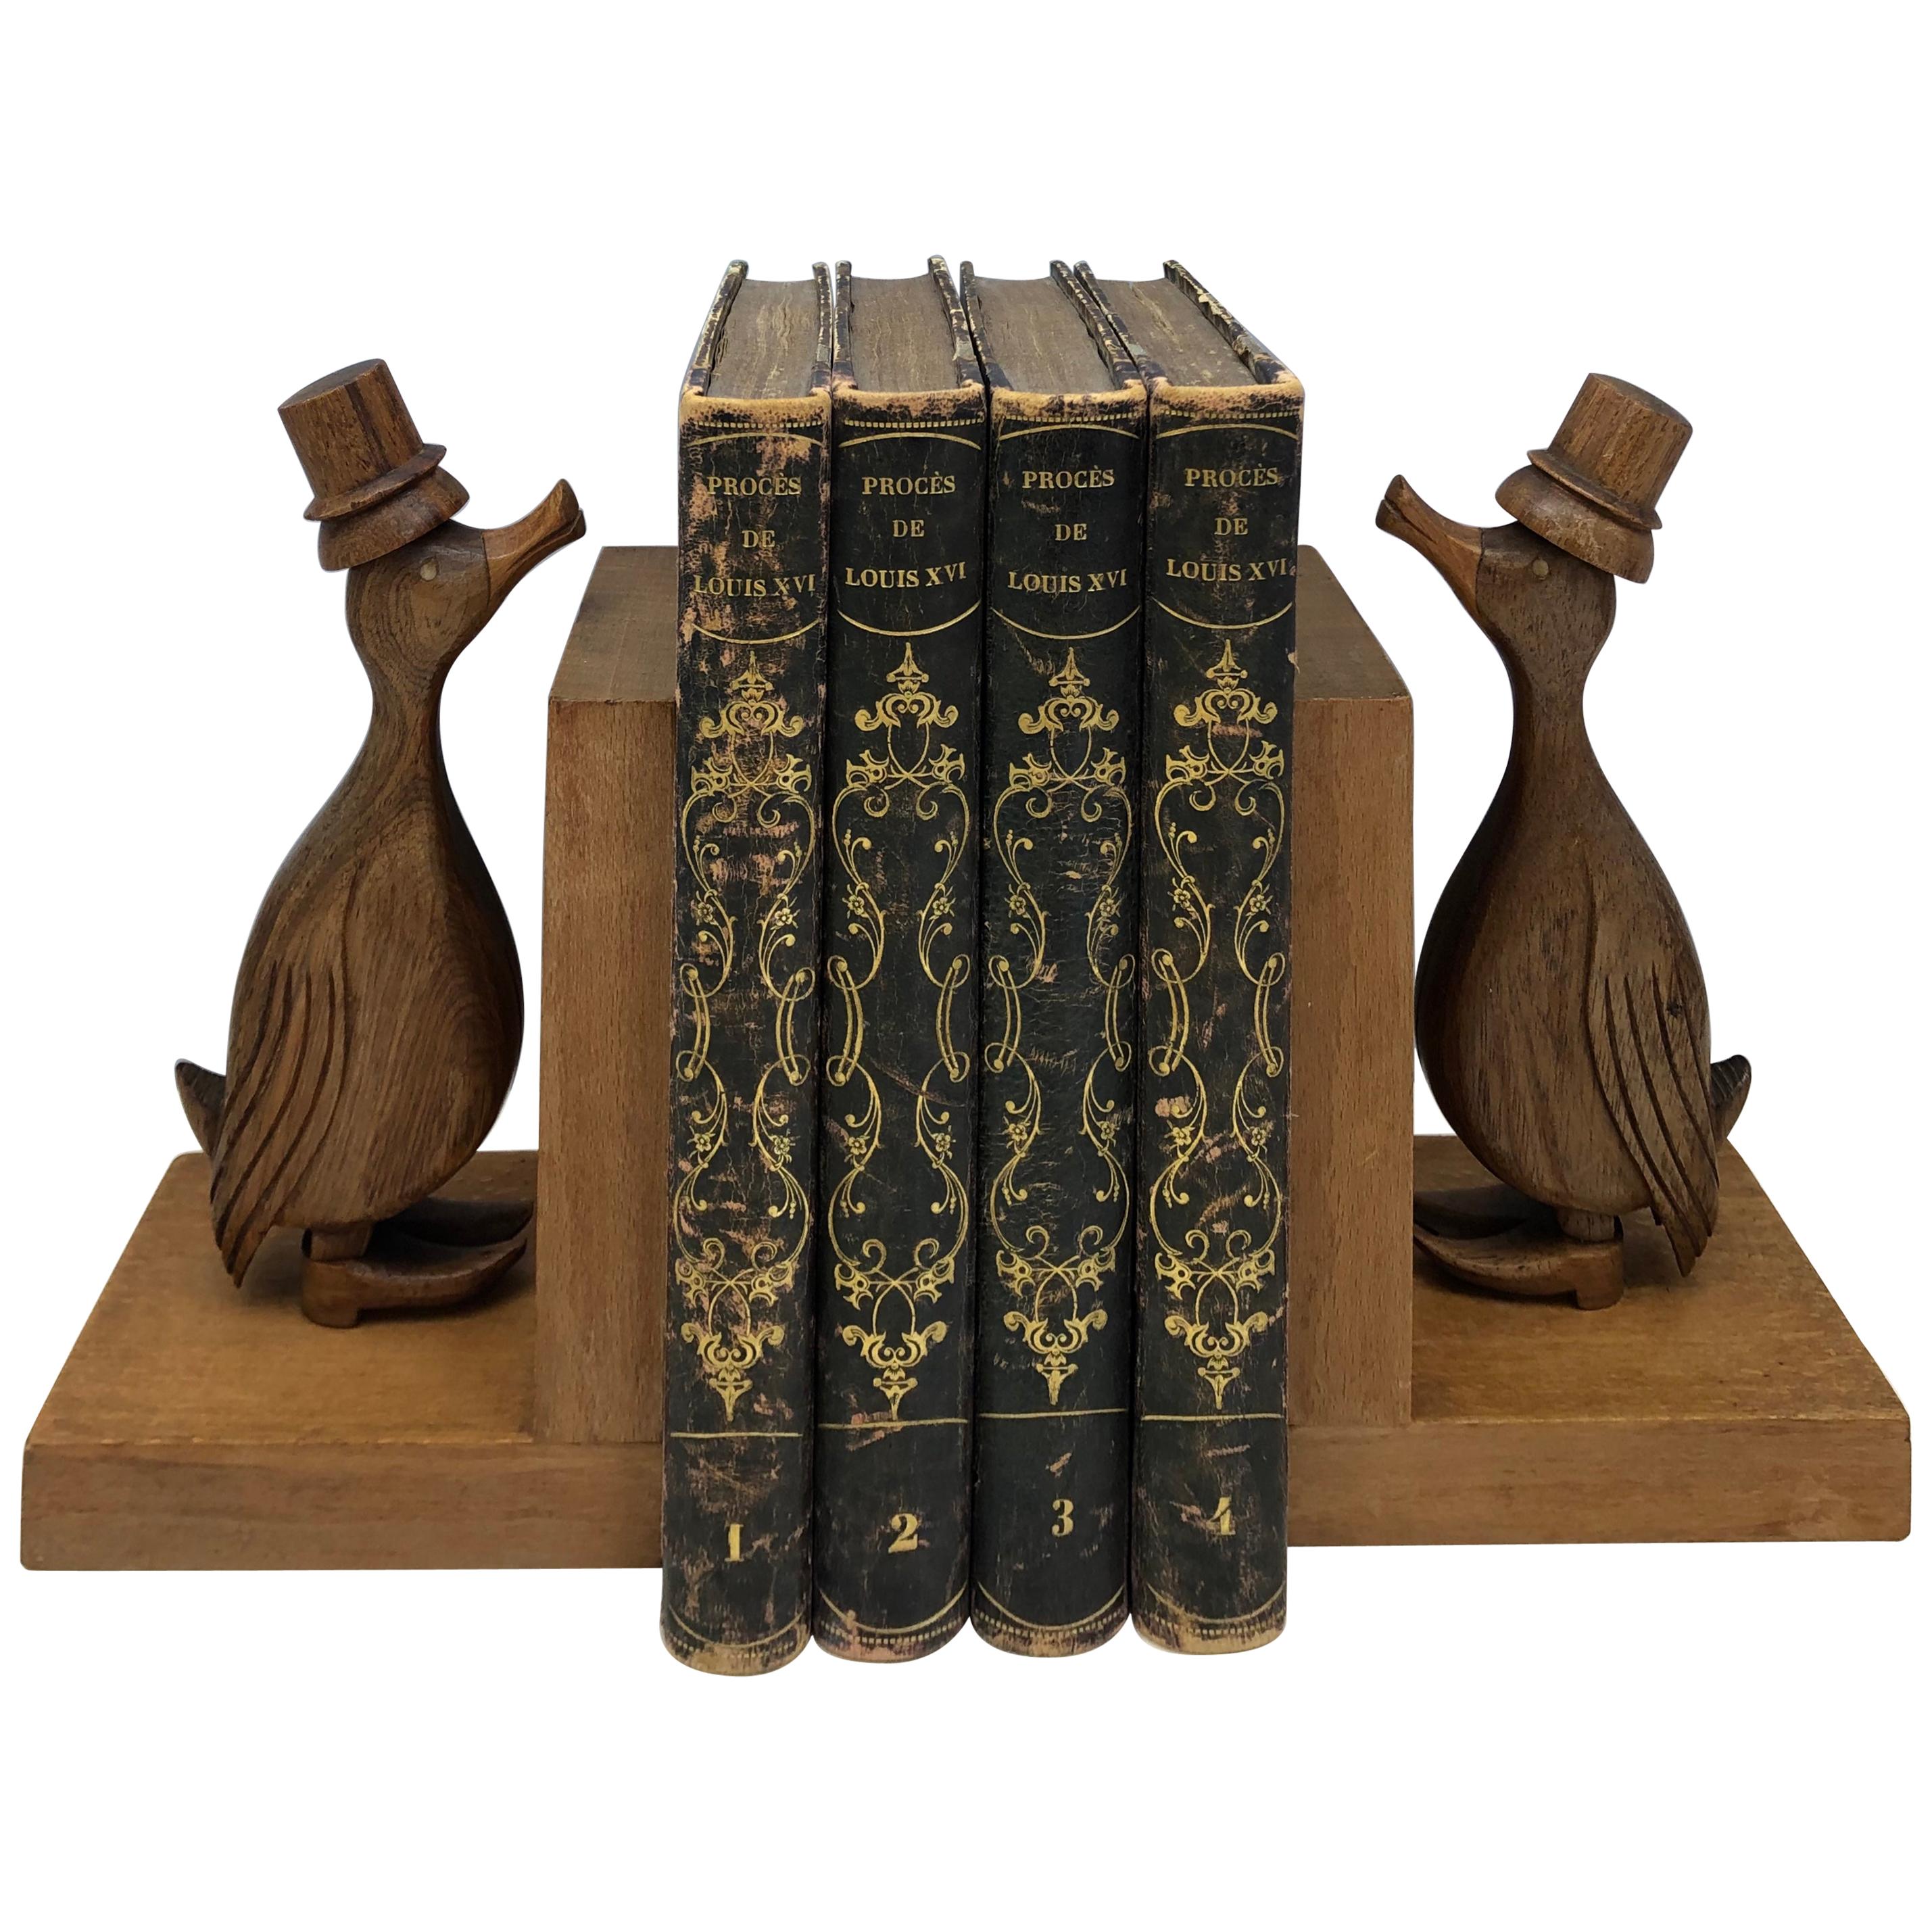 Pair of French Art Deco Period Hand Carved Wooden Bookends, Natural Walnut Wood